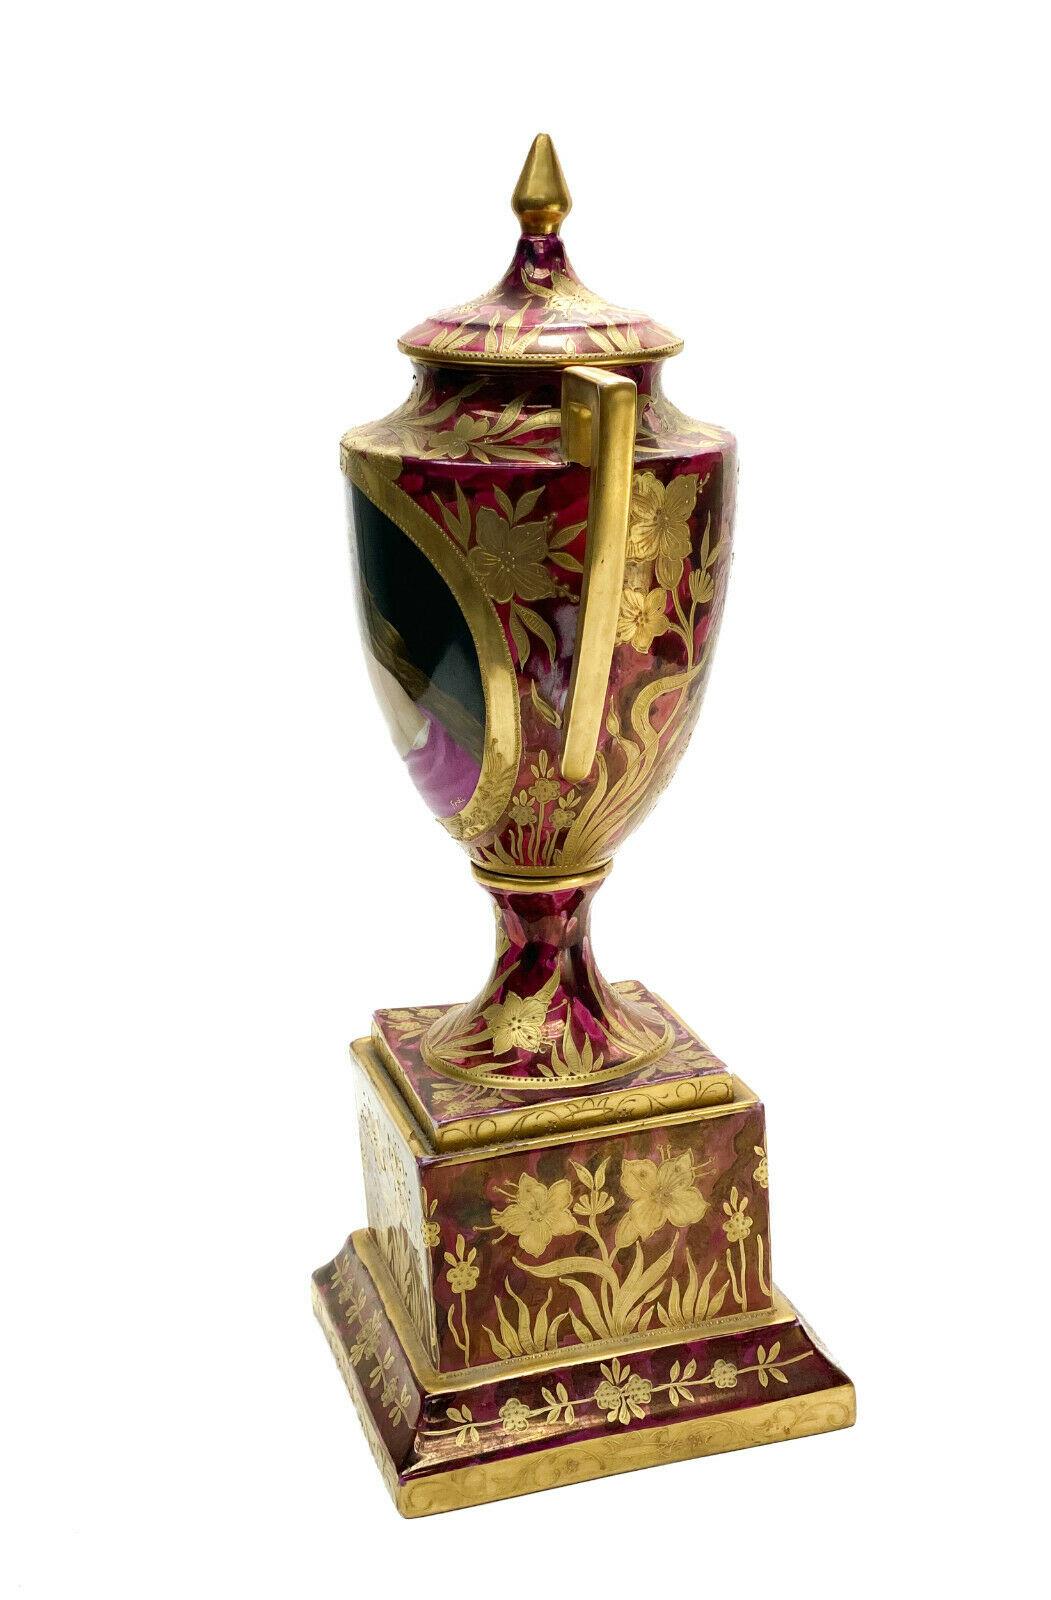 Royal Vienna Austria hand painted Porcelain double handled Urn, circa 1900.

A burgundy red ground wit gilt leaves and floral accents throughout. The central area depicts a hand painted partially nude beauty with long and wavy auburn hair. Artist